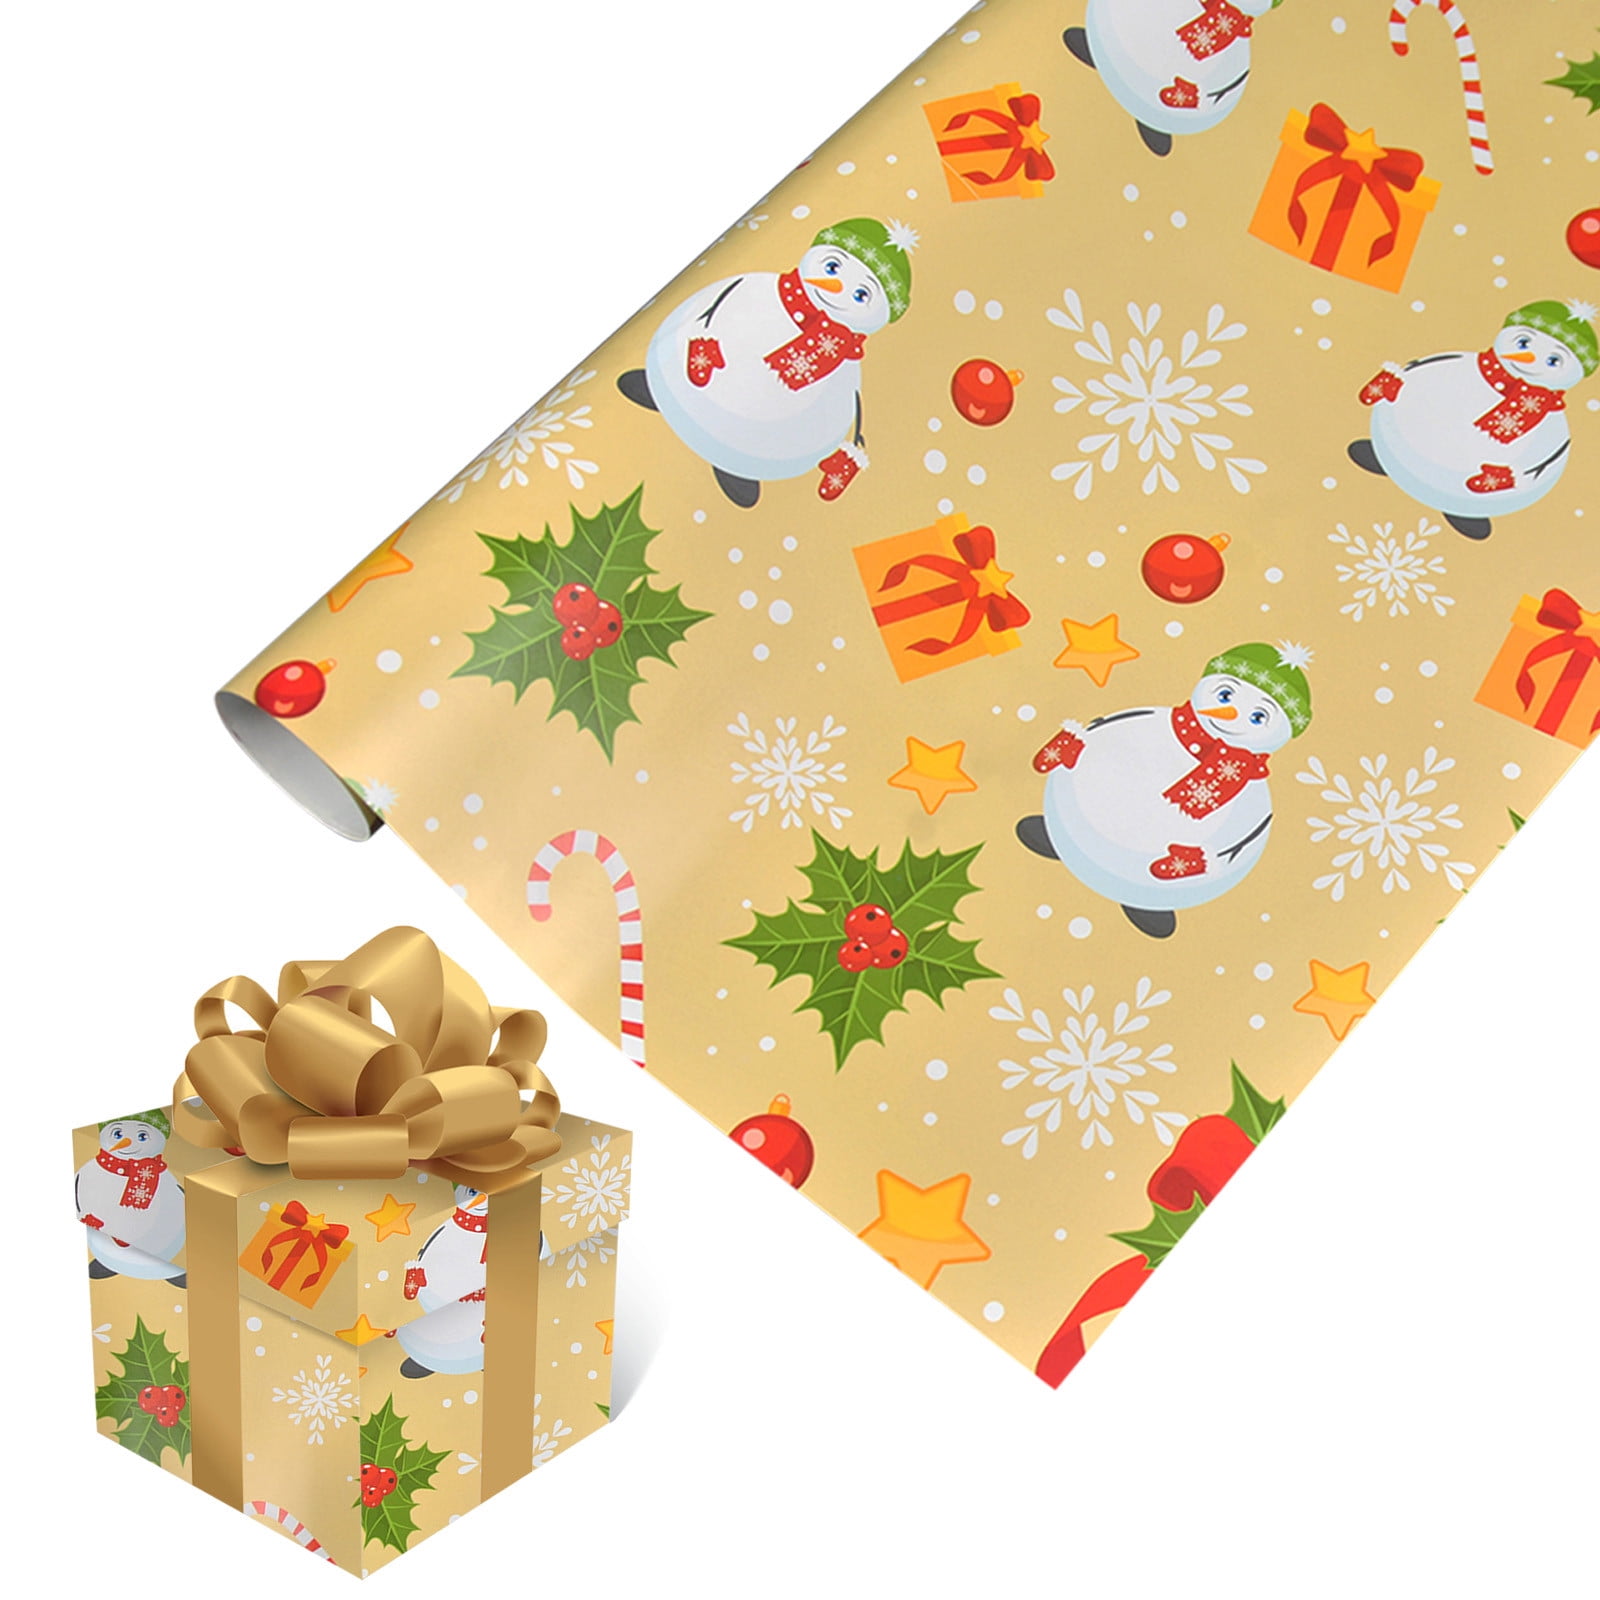 Shimmering Christmas Assorted Wrapping Paper Set (86.5 Sq Ft) - 4 Rolls